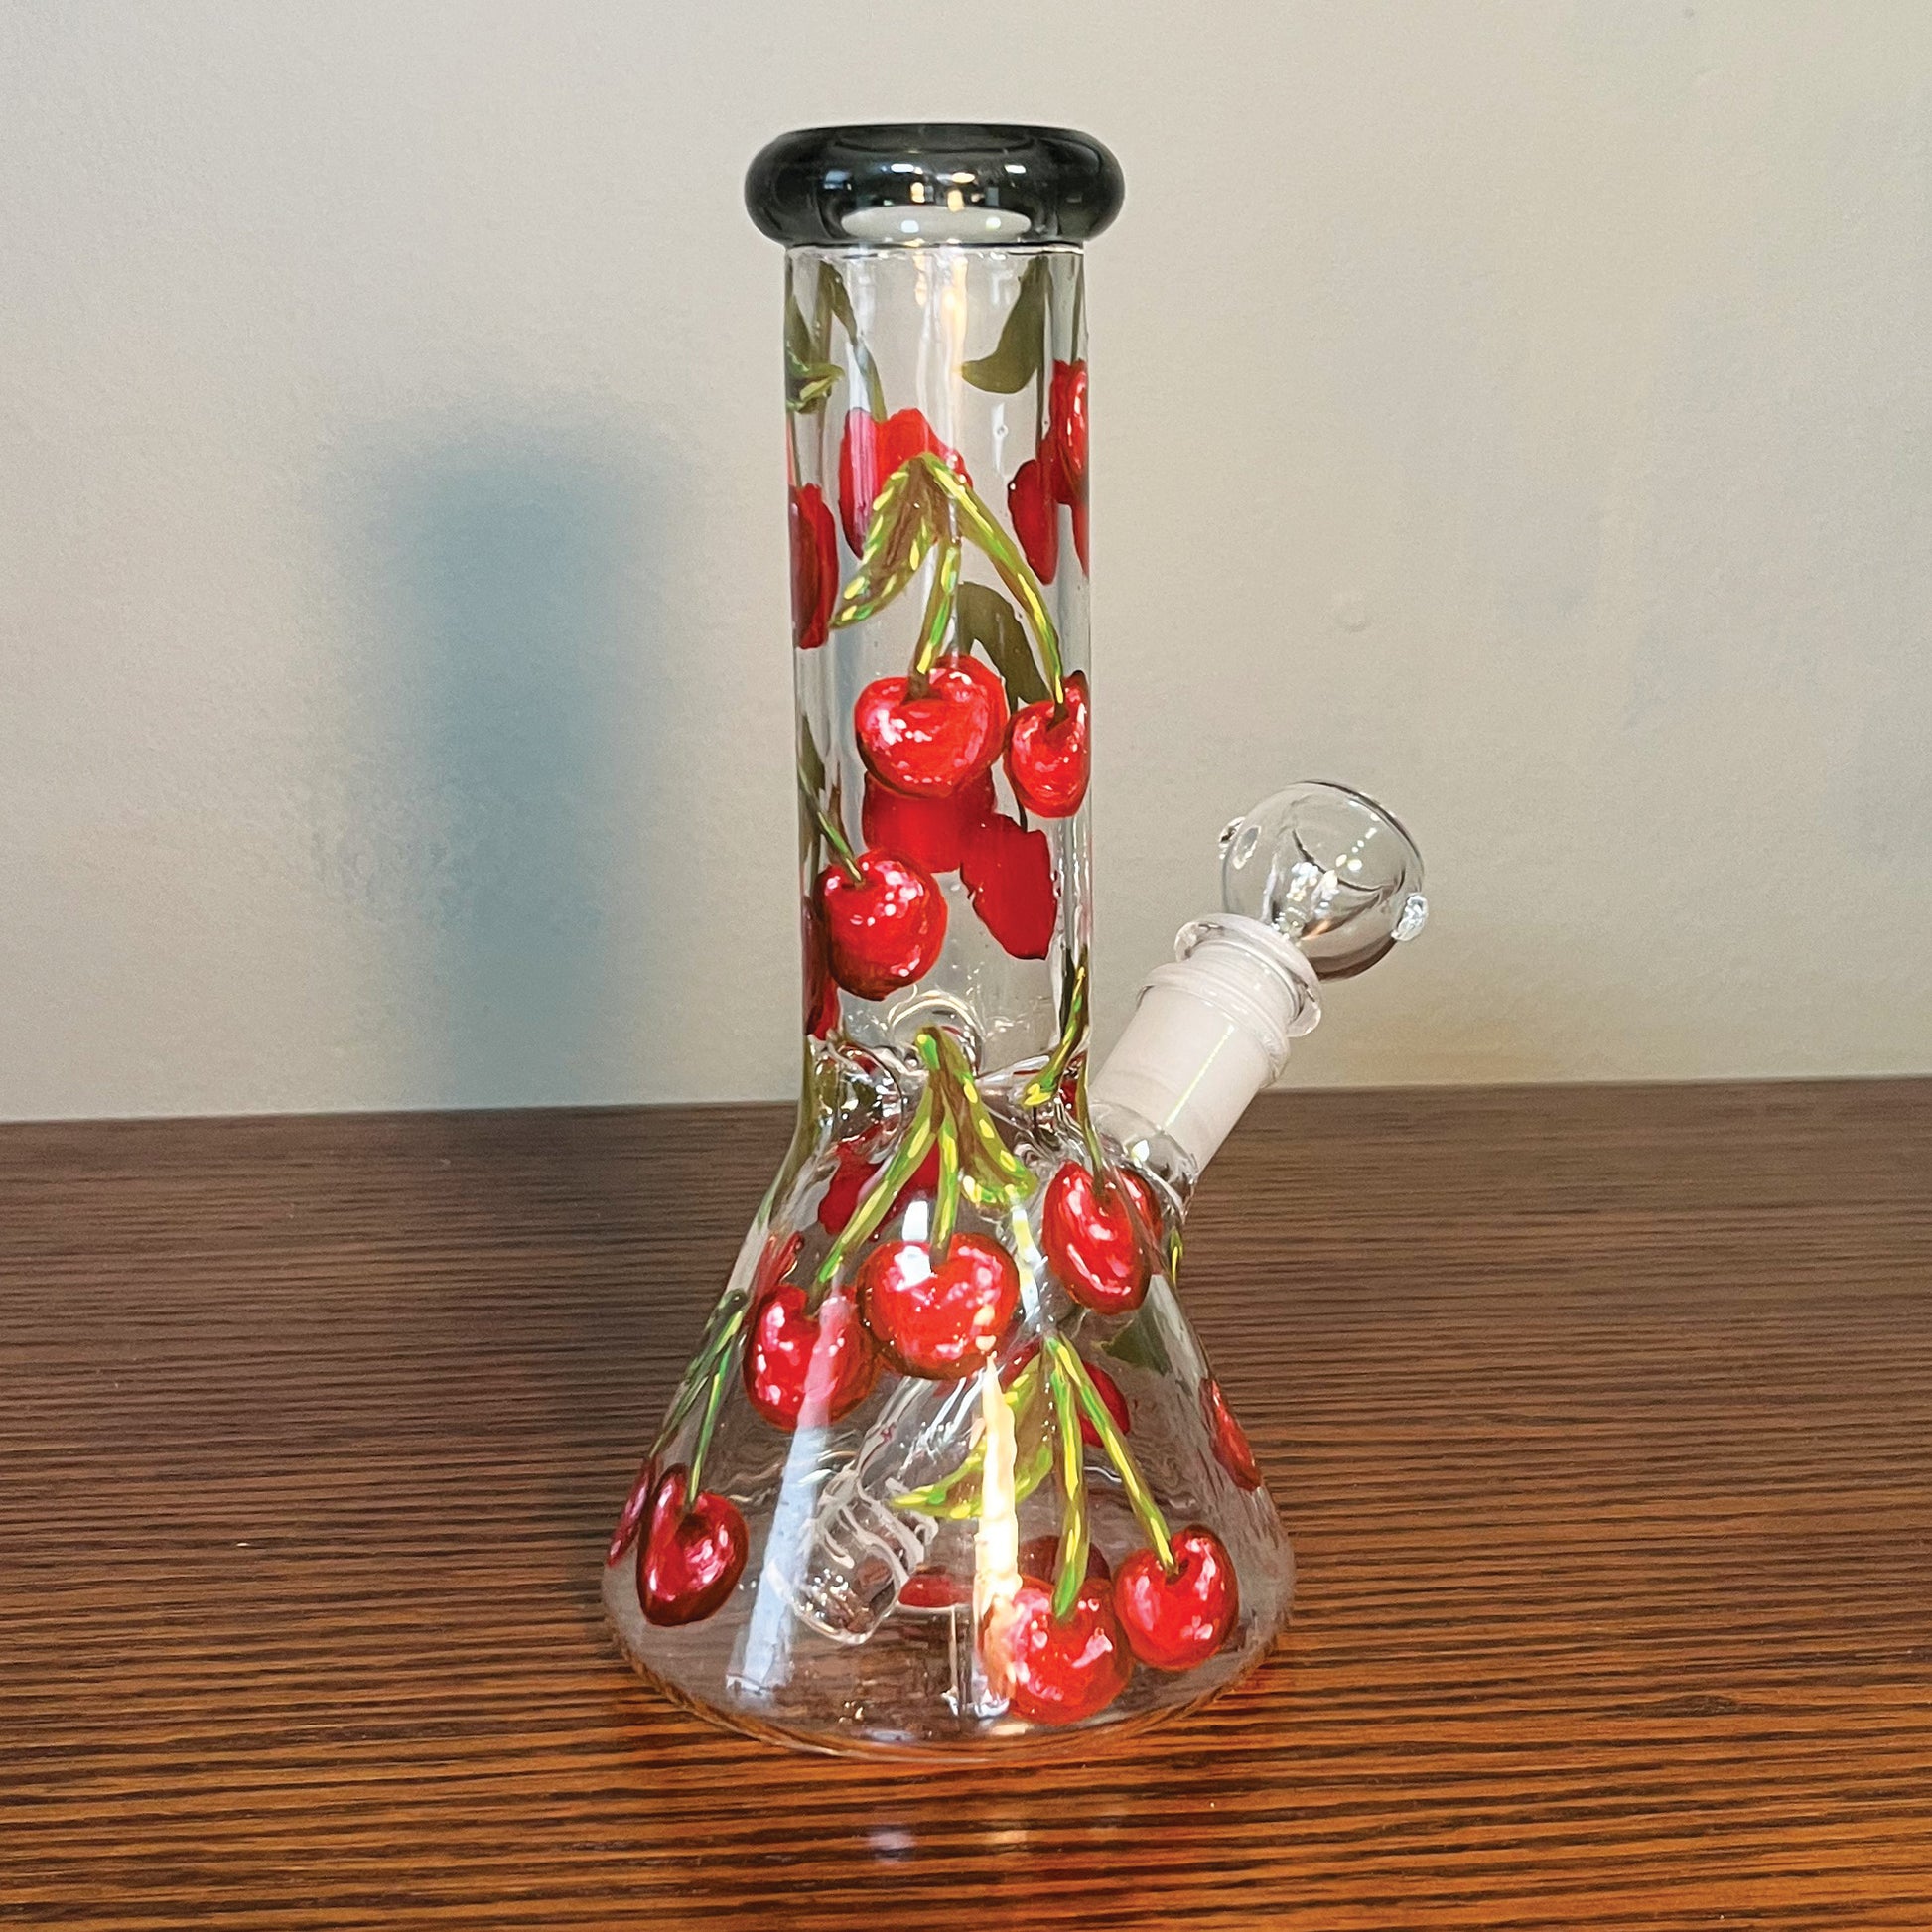 Same bong as before but the side angle